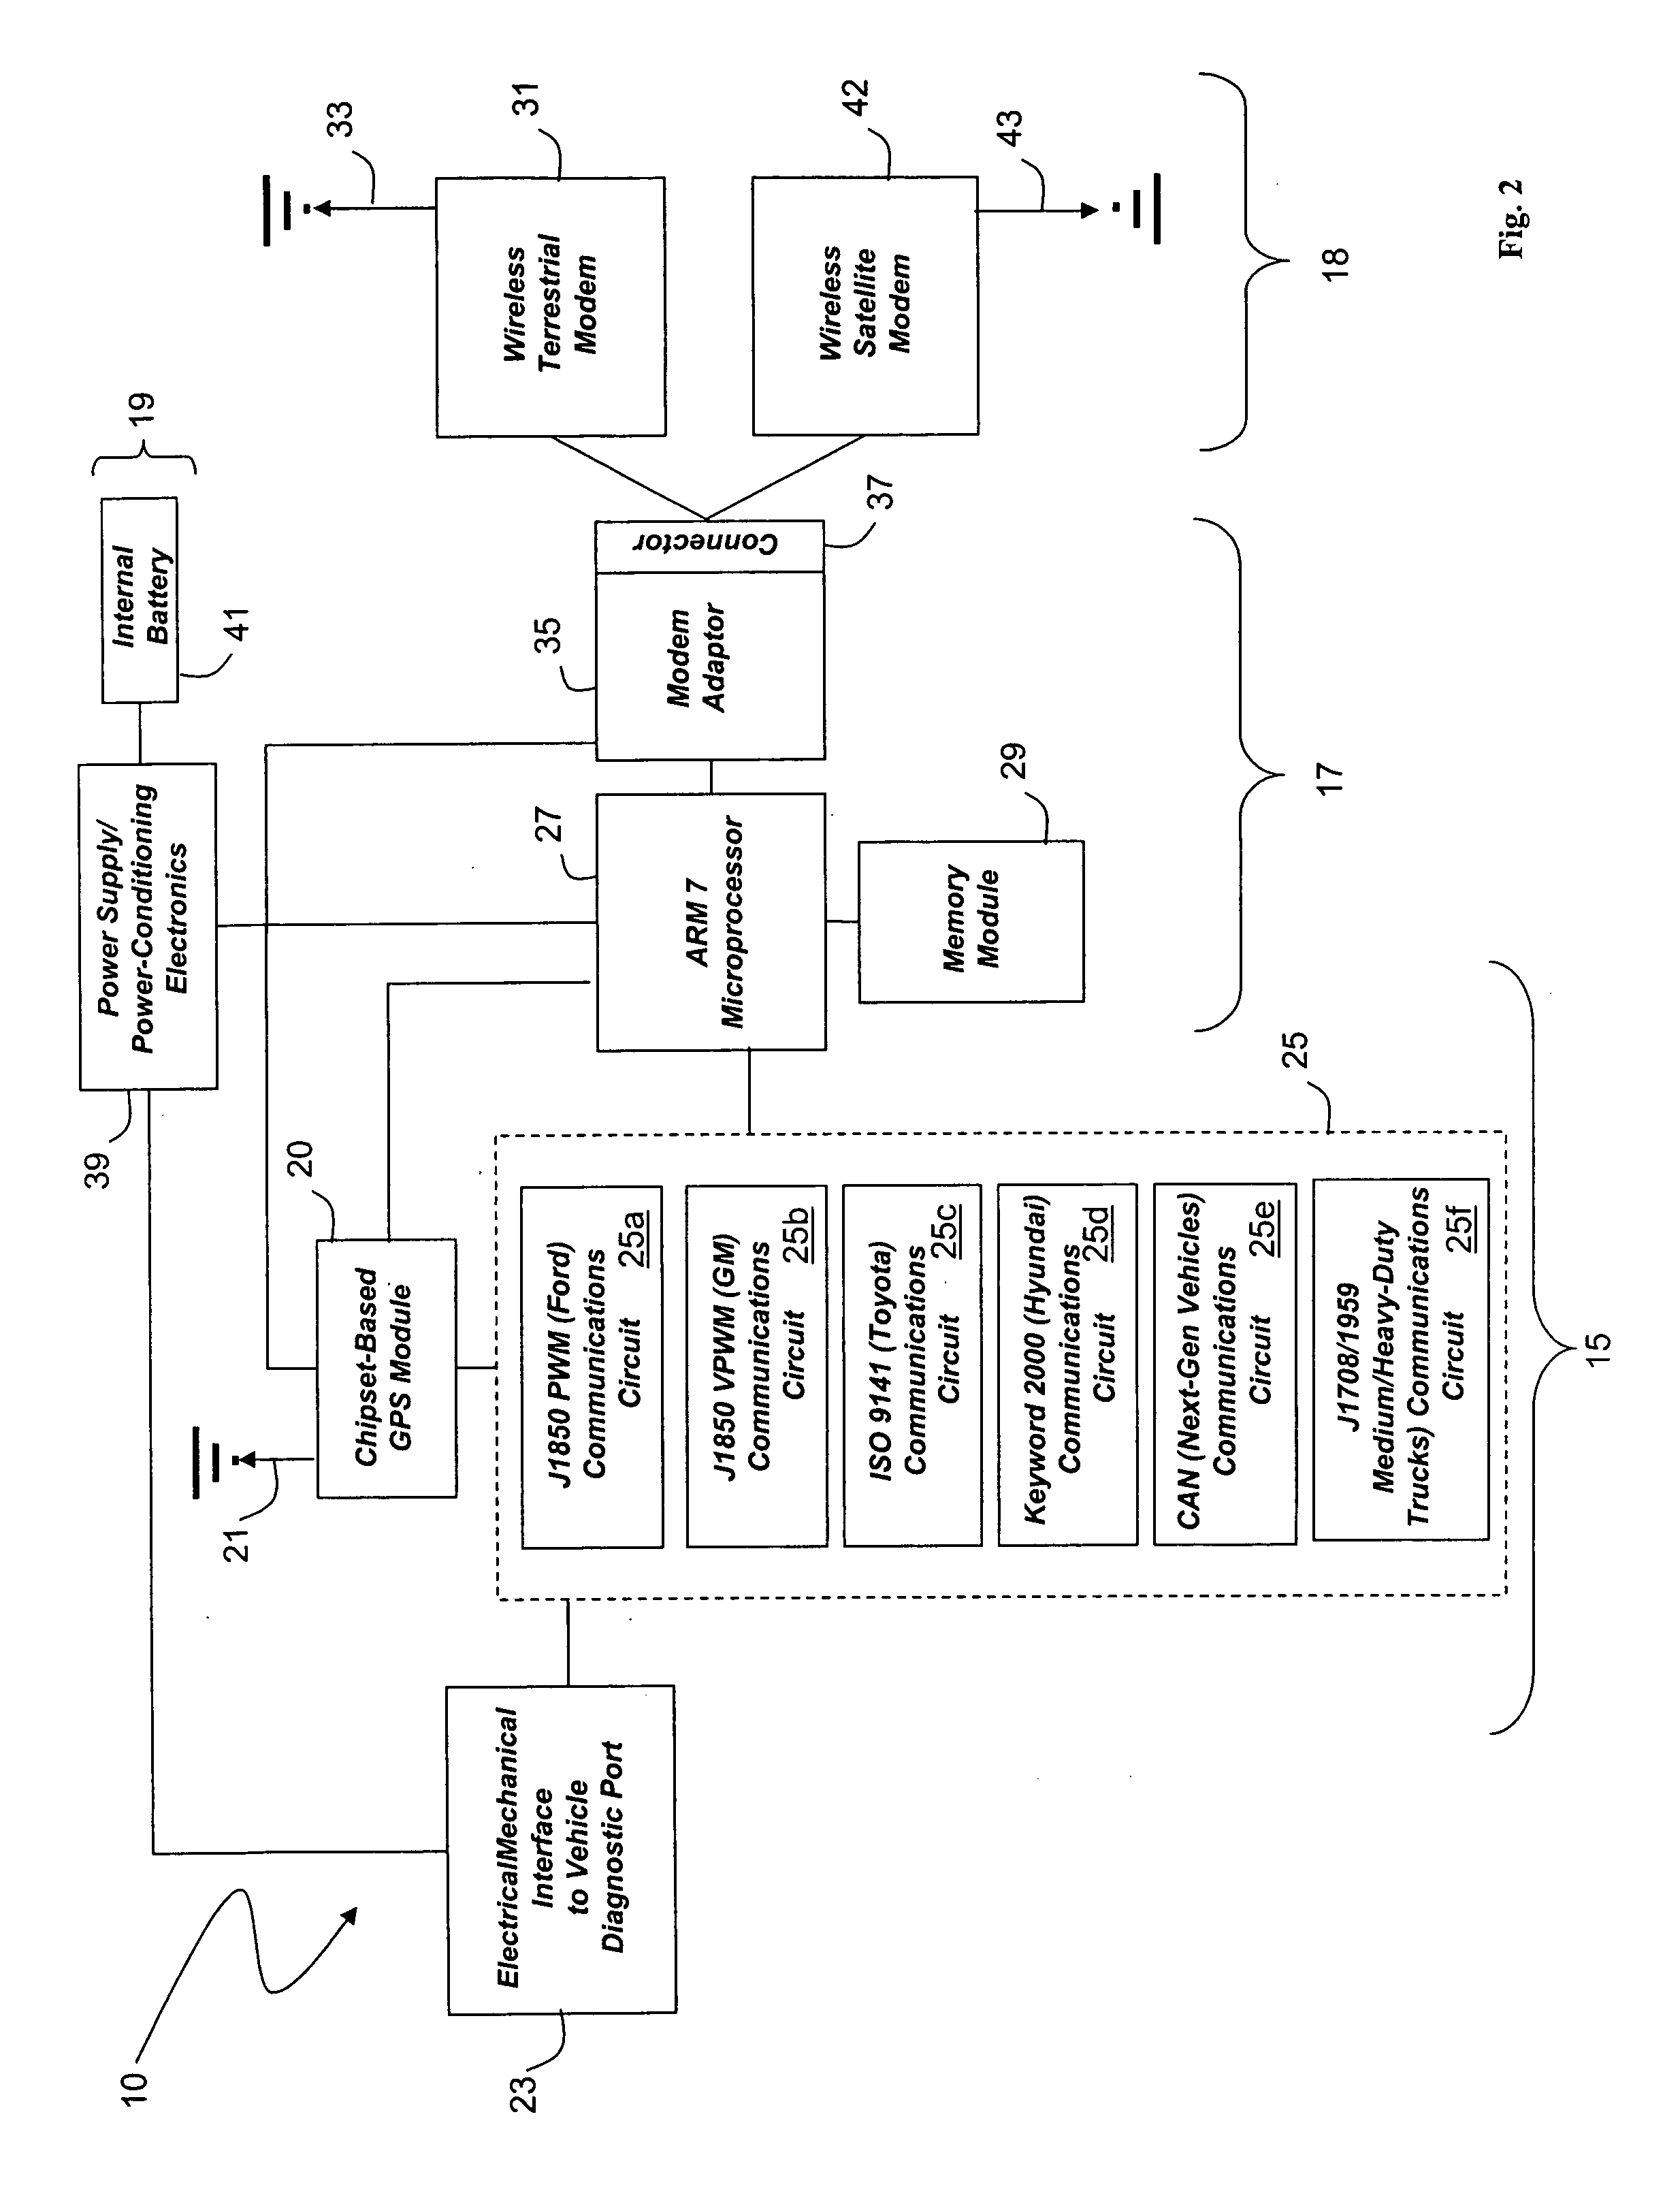 Wireless vehicle-monitoring system operating on both terrestrial and satellite networks